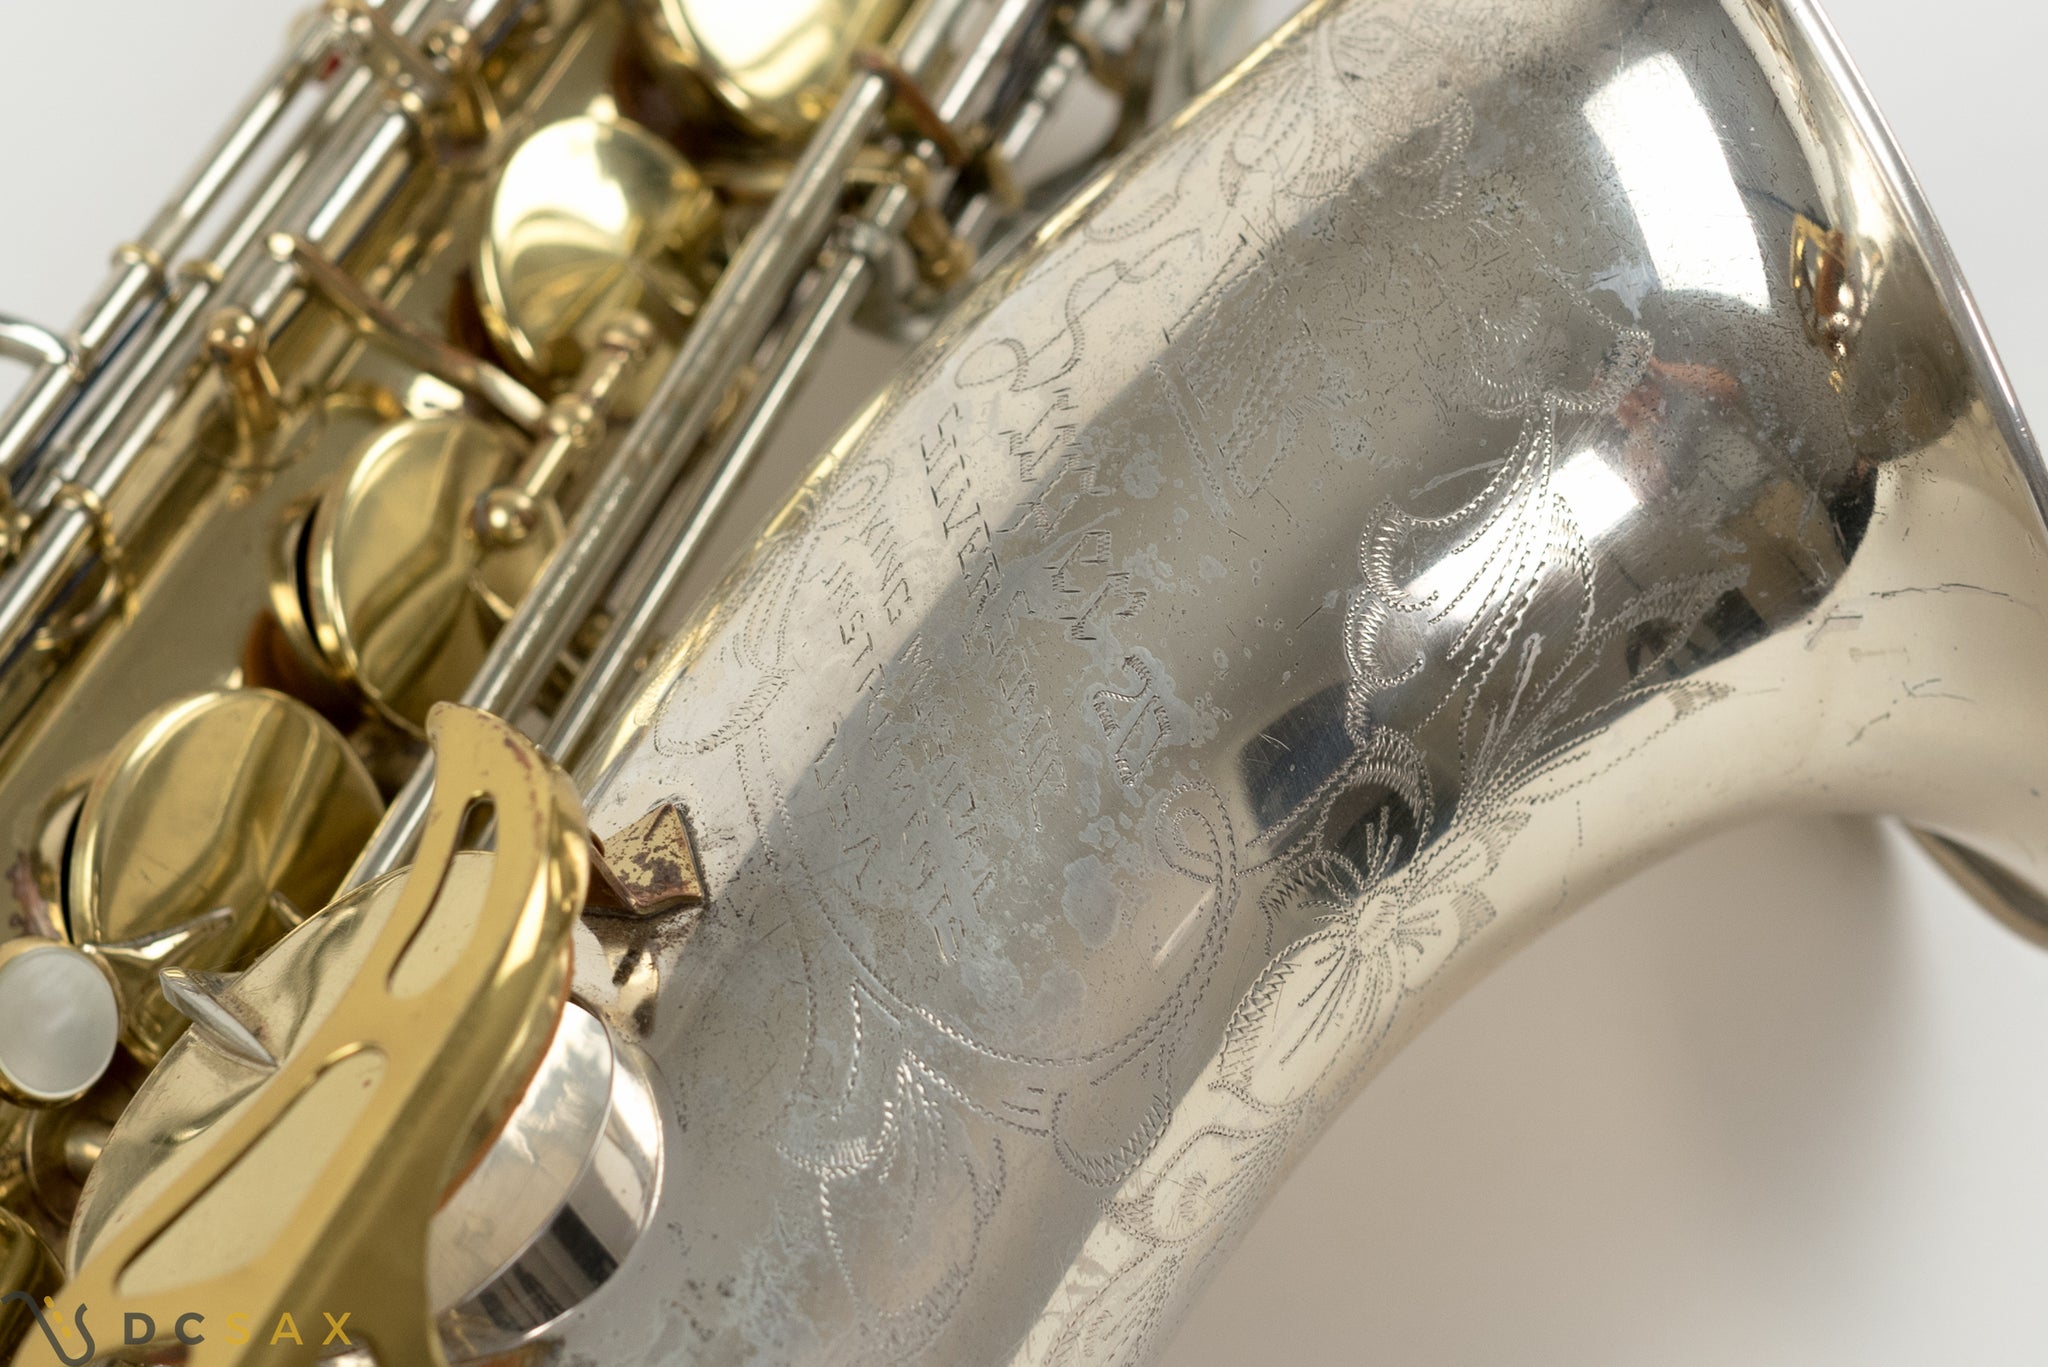 King Super 20 Tenor Saxophone, Silver Sonic, Just Serviced, Video